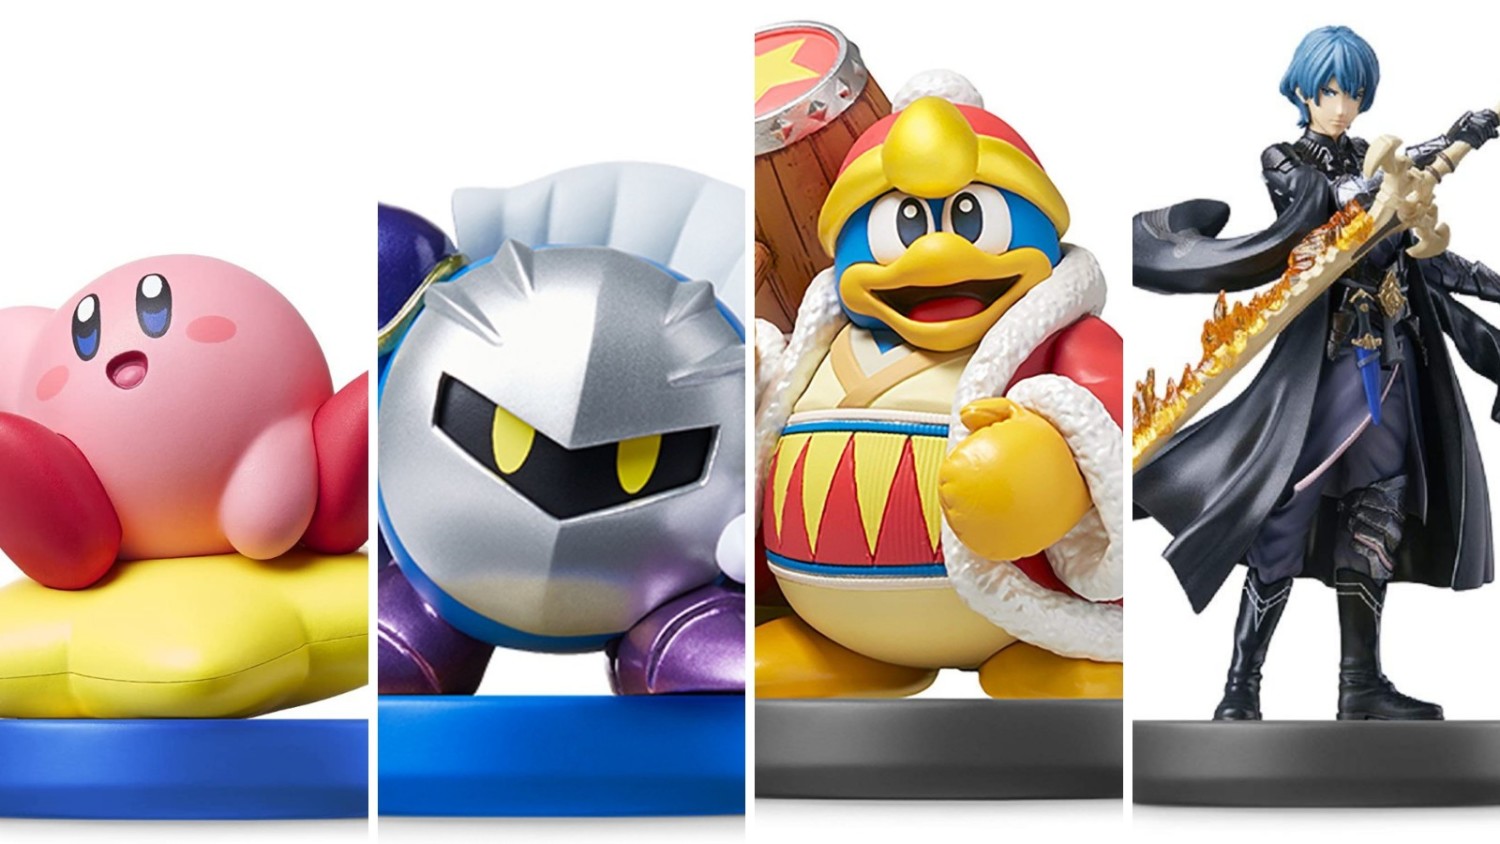 Kirby, Meta Knight, King Dedede, And Byleth Amiibo Restocks Hinted By CPSIA  Listings – NintendoSoup